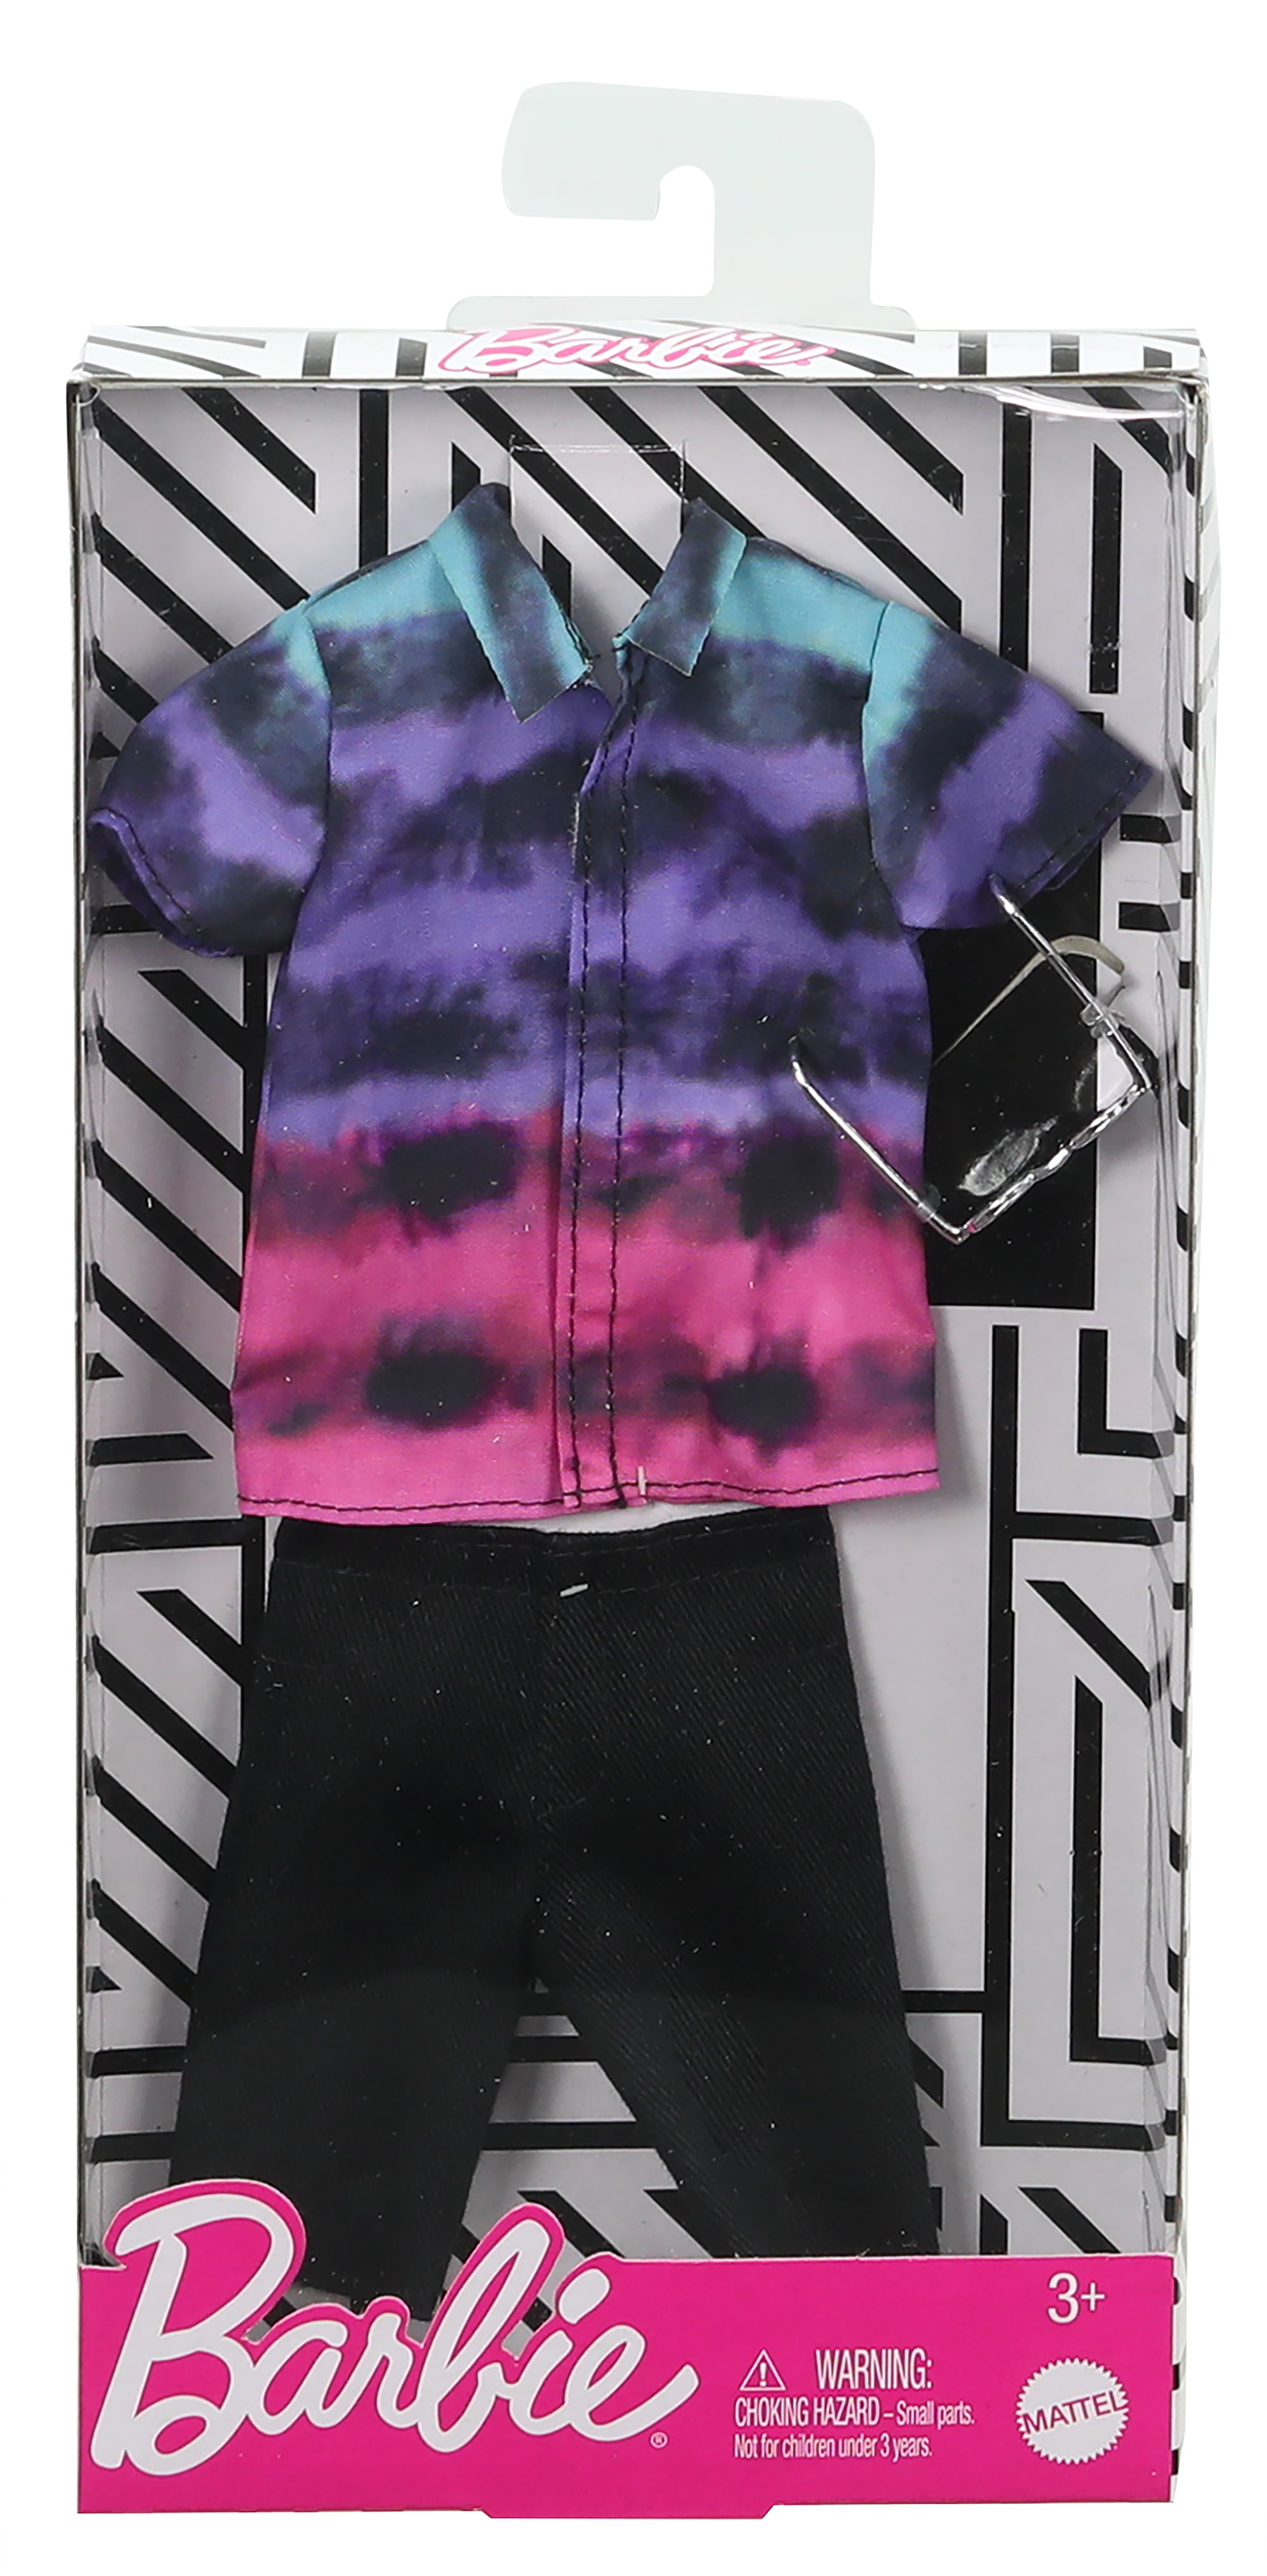 Barbie Fashions Pack: Ken Doll Clothes With Tie-Dye Shirt, Black 